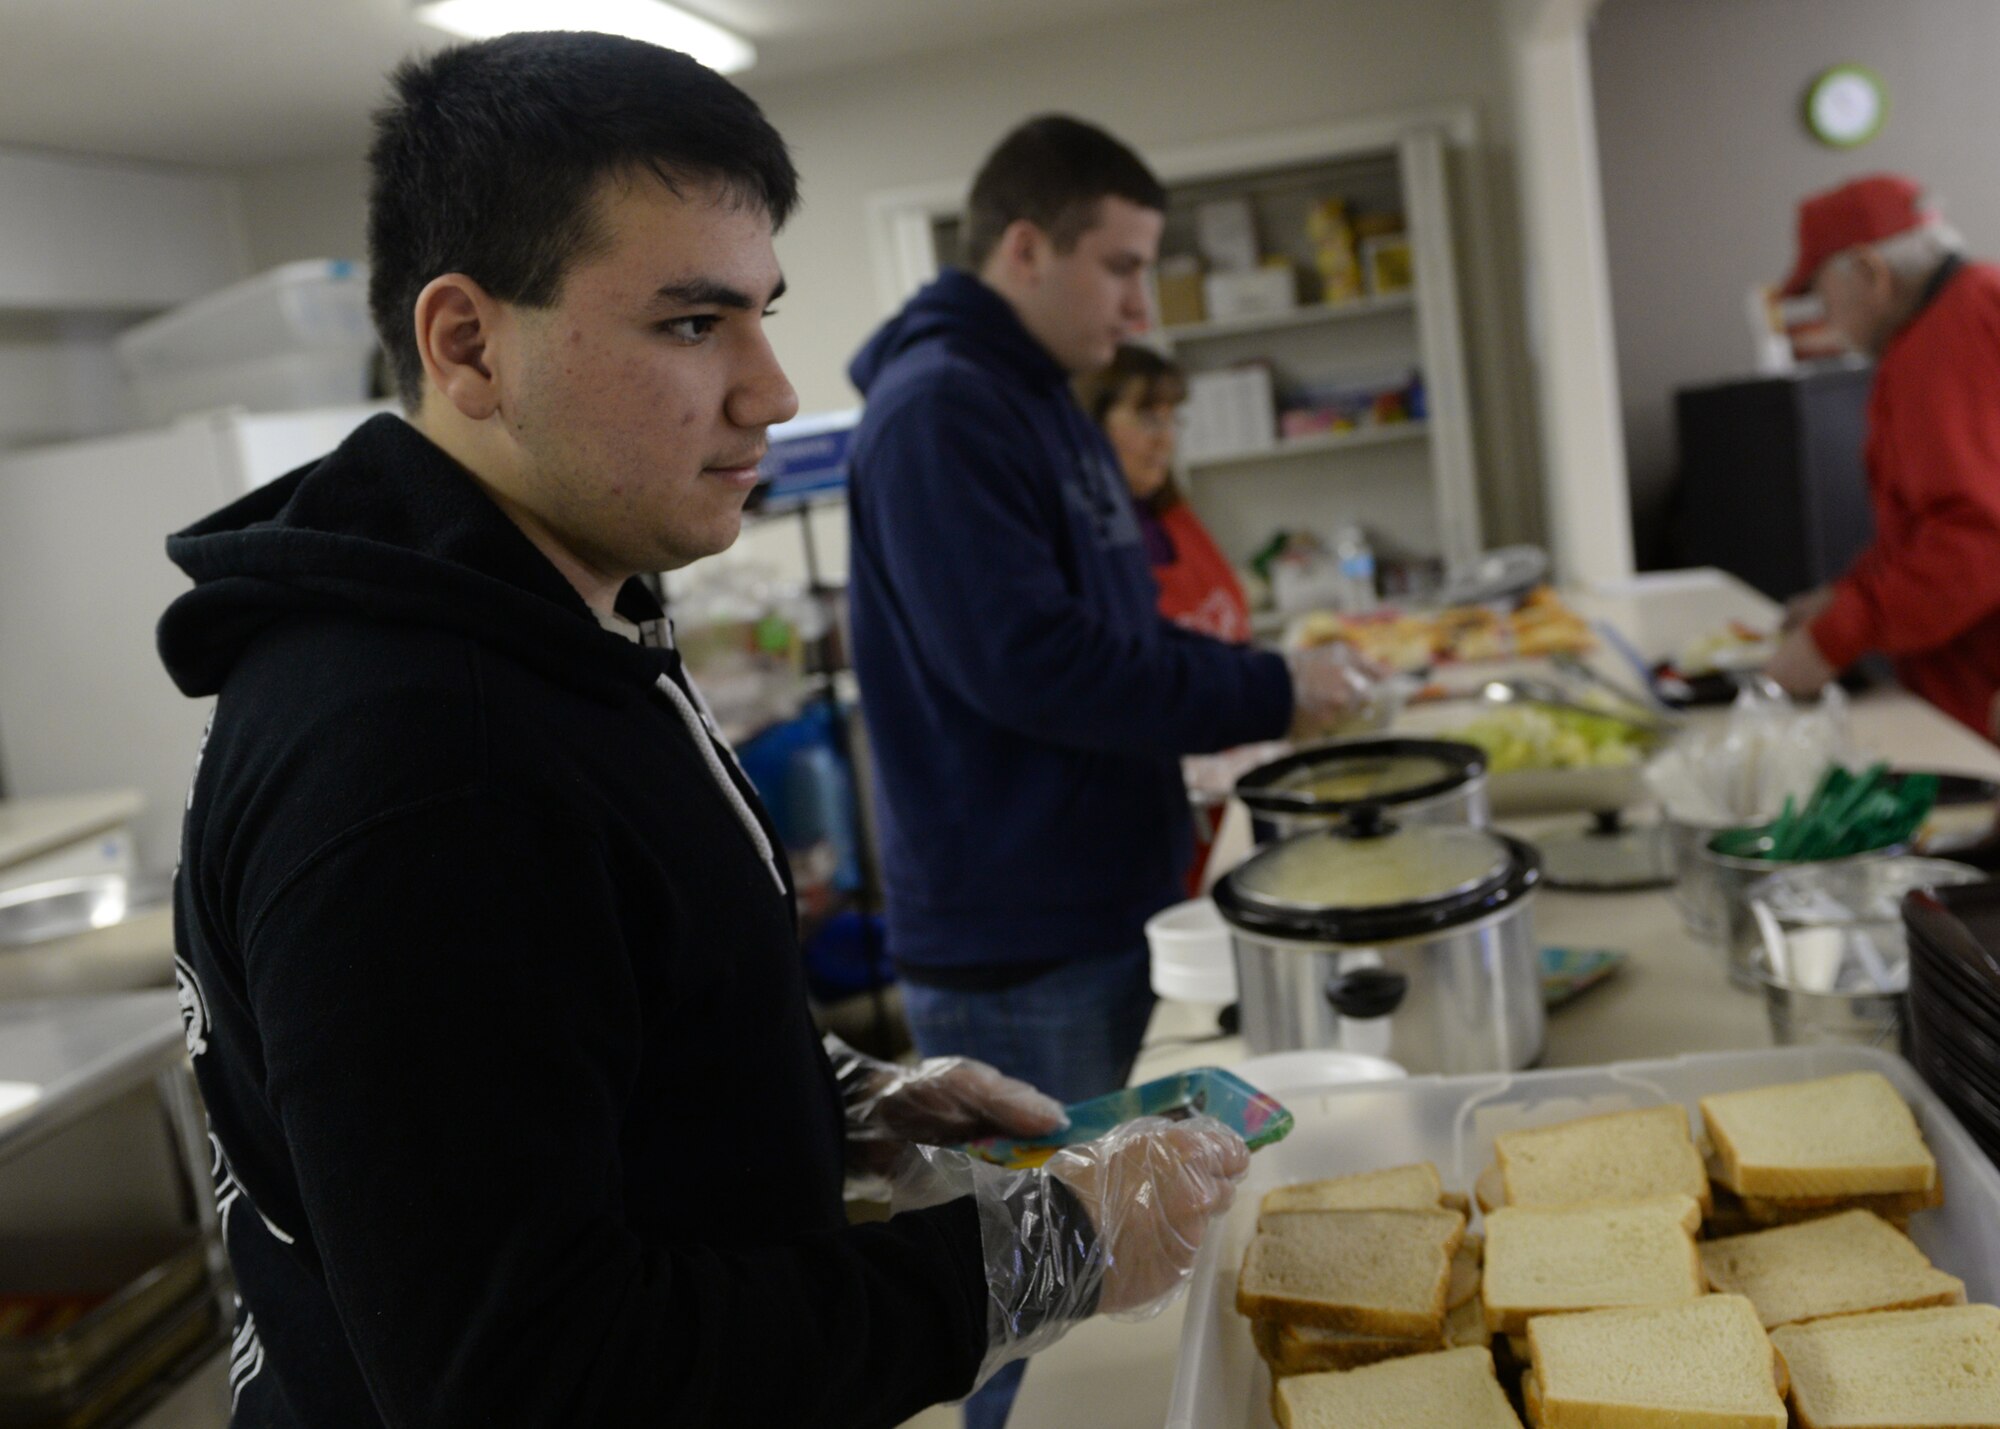 ALTUS AIR FORCE BASE, Okla. – U.S. Air Force Senior Airman Josenan Cruz, 97th Medical Group Tricare operations and patient administration clerk, prepares sandwiches at the Salvation Army Soup Kitchen, Jan. 8, 2015. Cruz and five other Airmen spent four hours preparing and serving plates of food to community members in need. (U.S. Air Force photo by Senior Airman Levin Boland/Released)